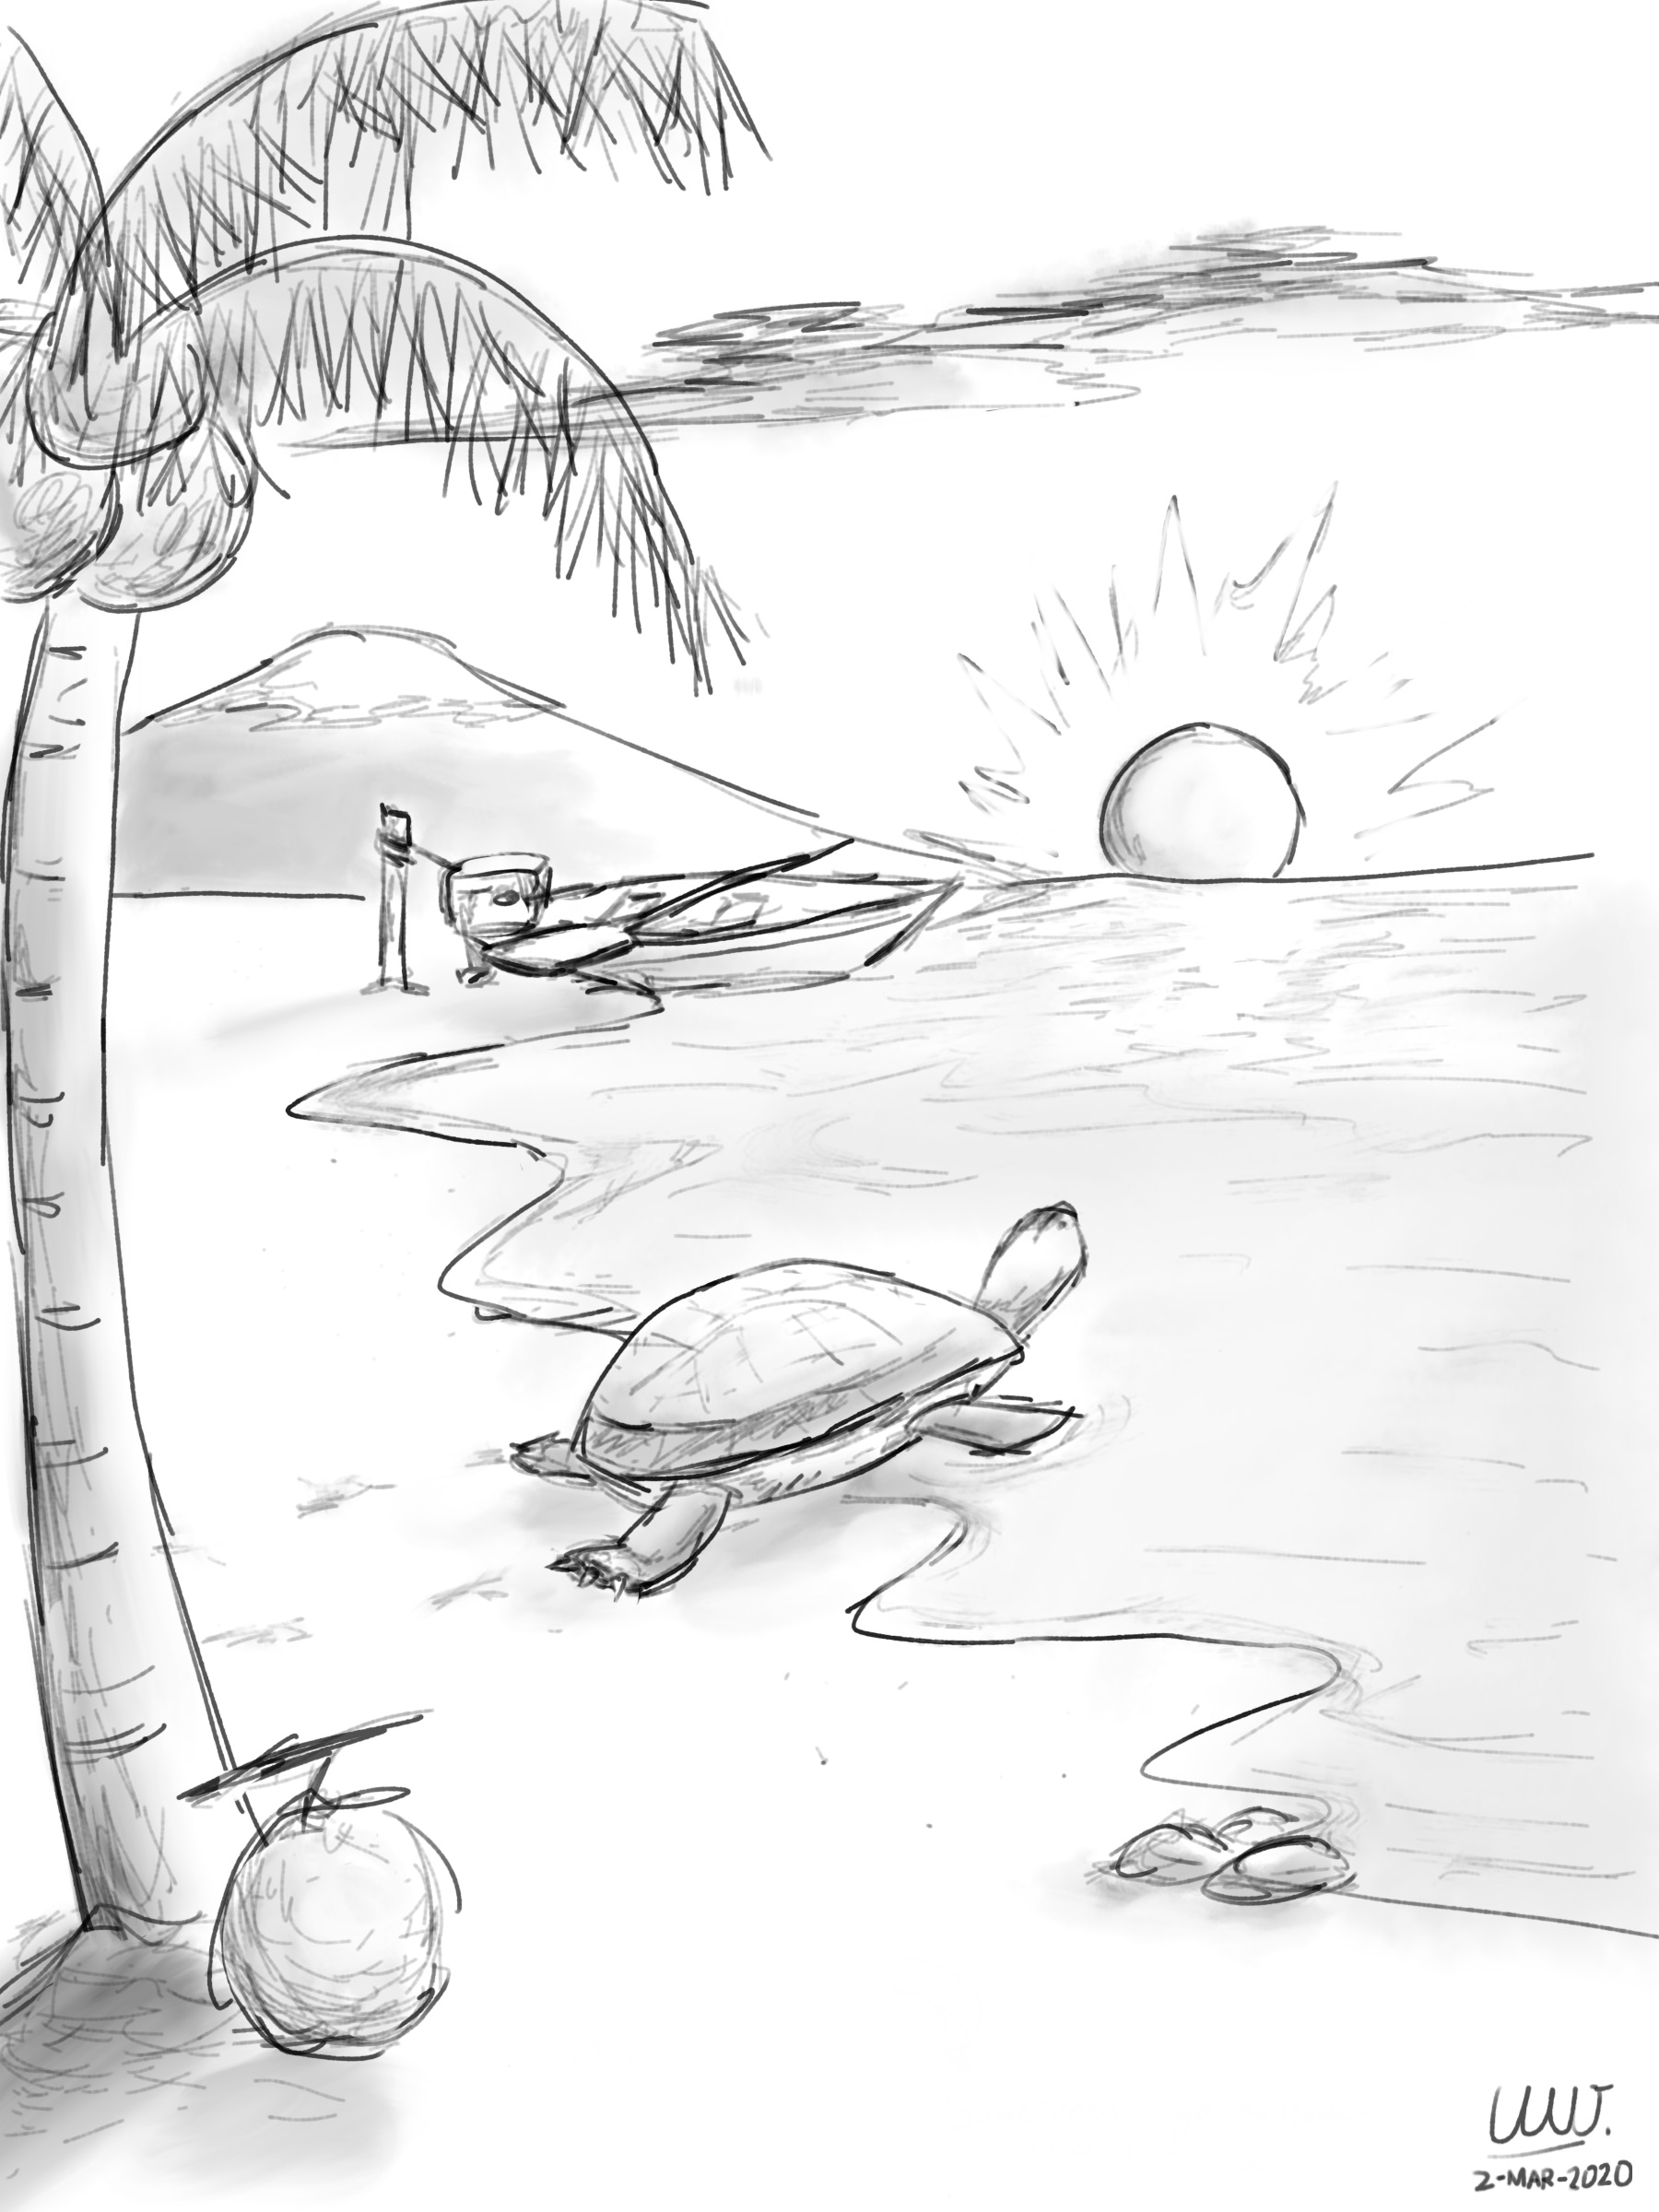 [Beach Turtle - Artwork Image Description]: A turtle appears to be looking at the sunset at the shore. Some clouds, a mountain, a coconut tree, and a wooden boat can be seen in the background. A coconut can be seen at the root of the coconut tree, and a few pebbles/stones can be seen at the shore near the turtle.